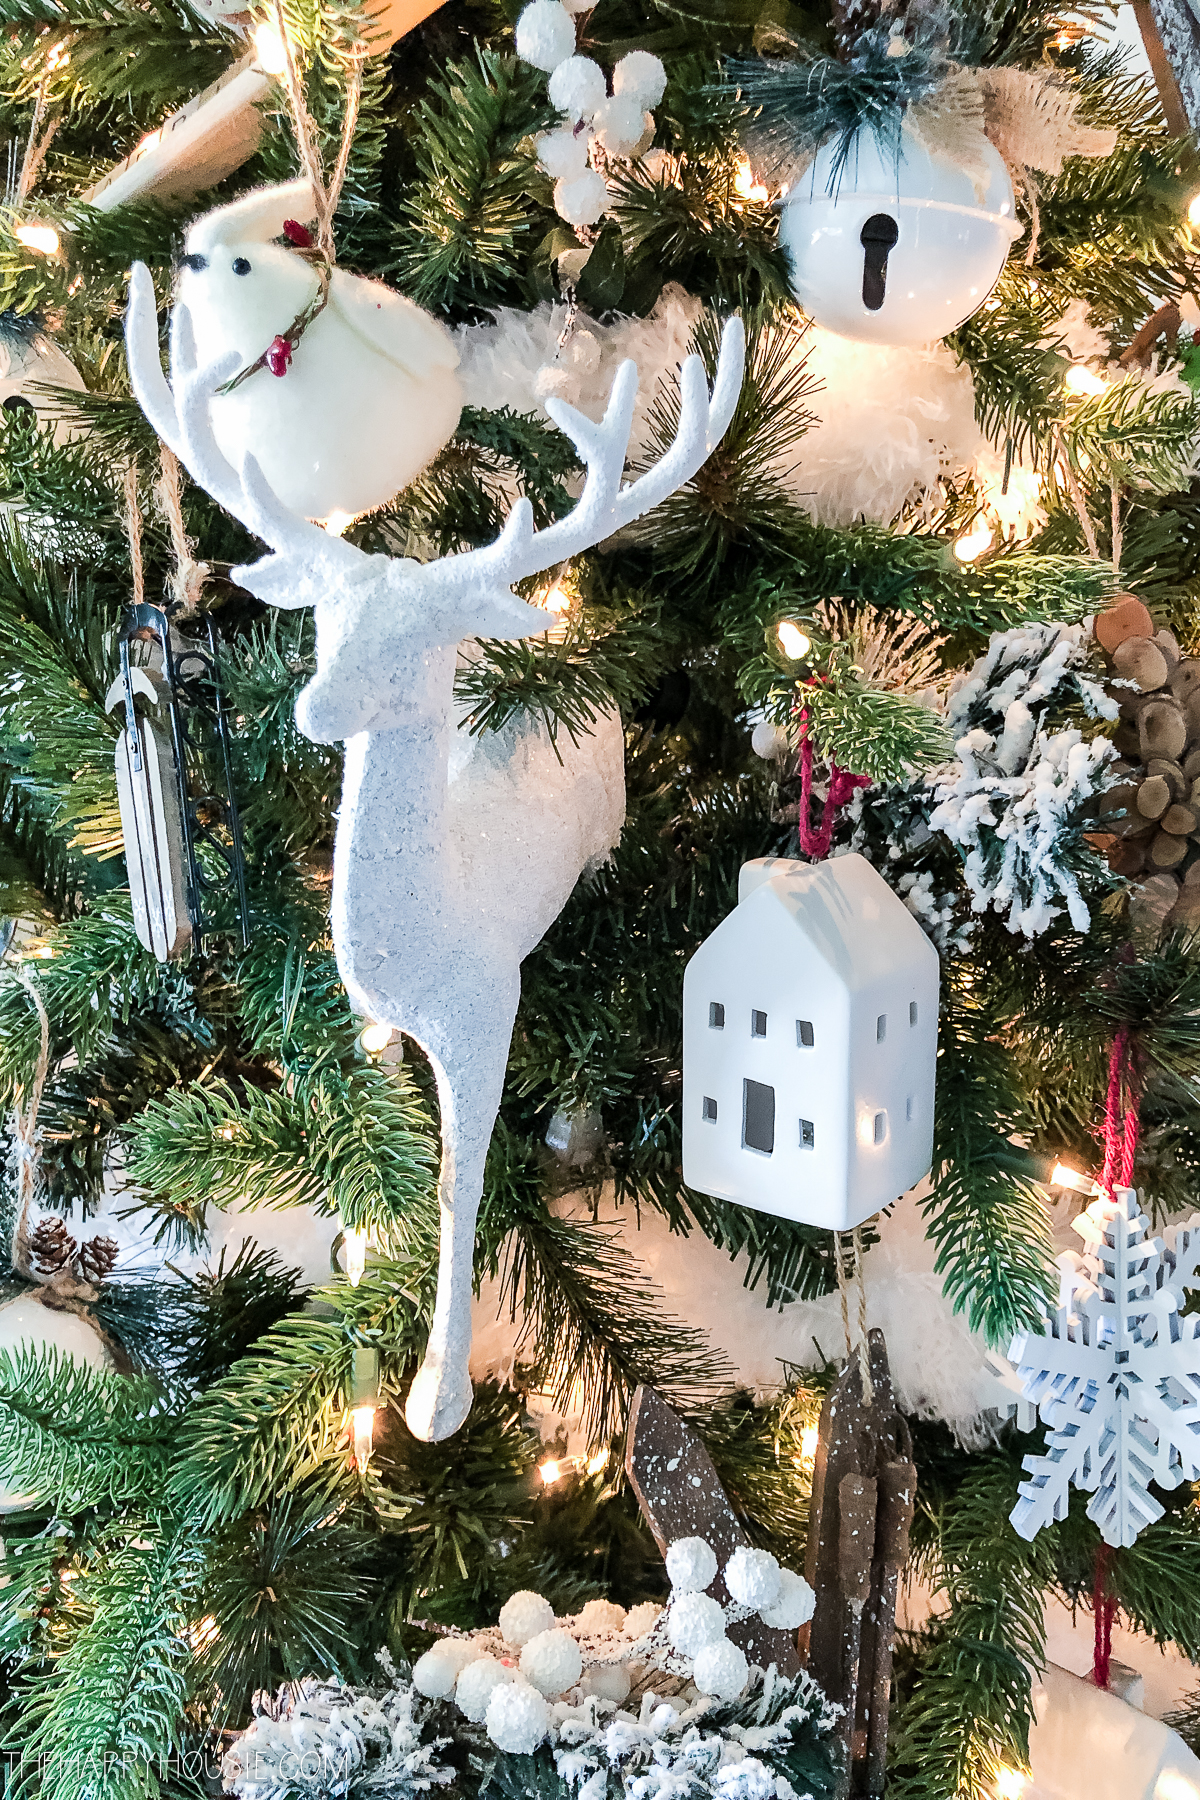 A small white Scandi deer is on the tree.